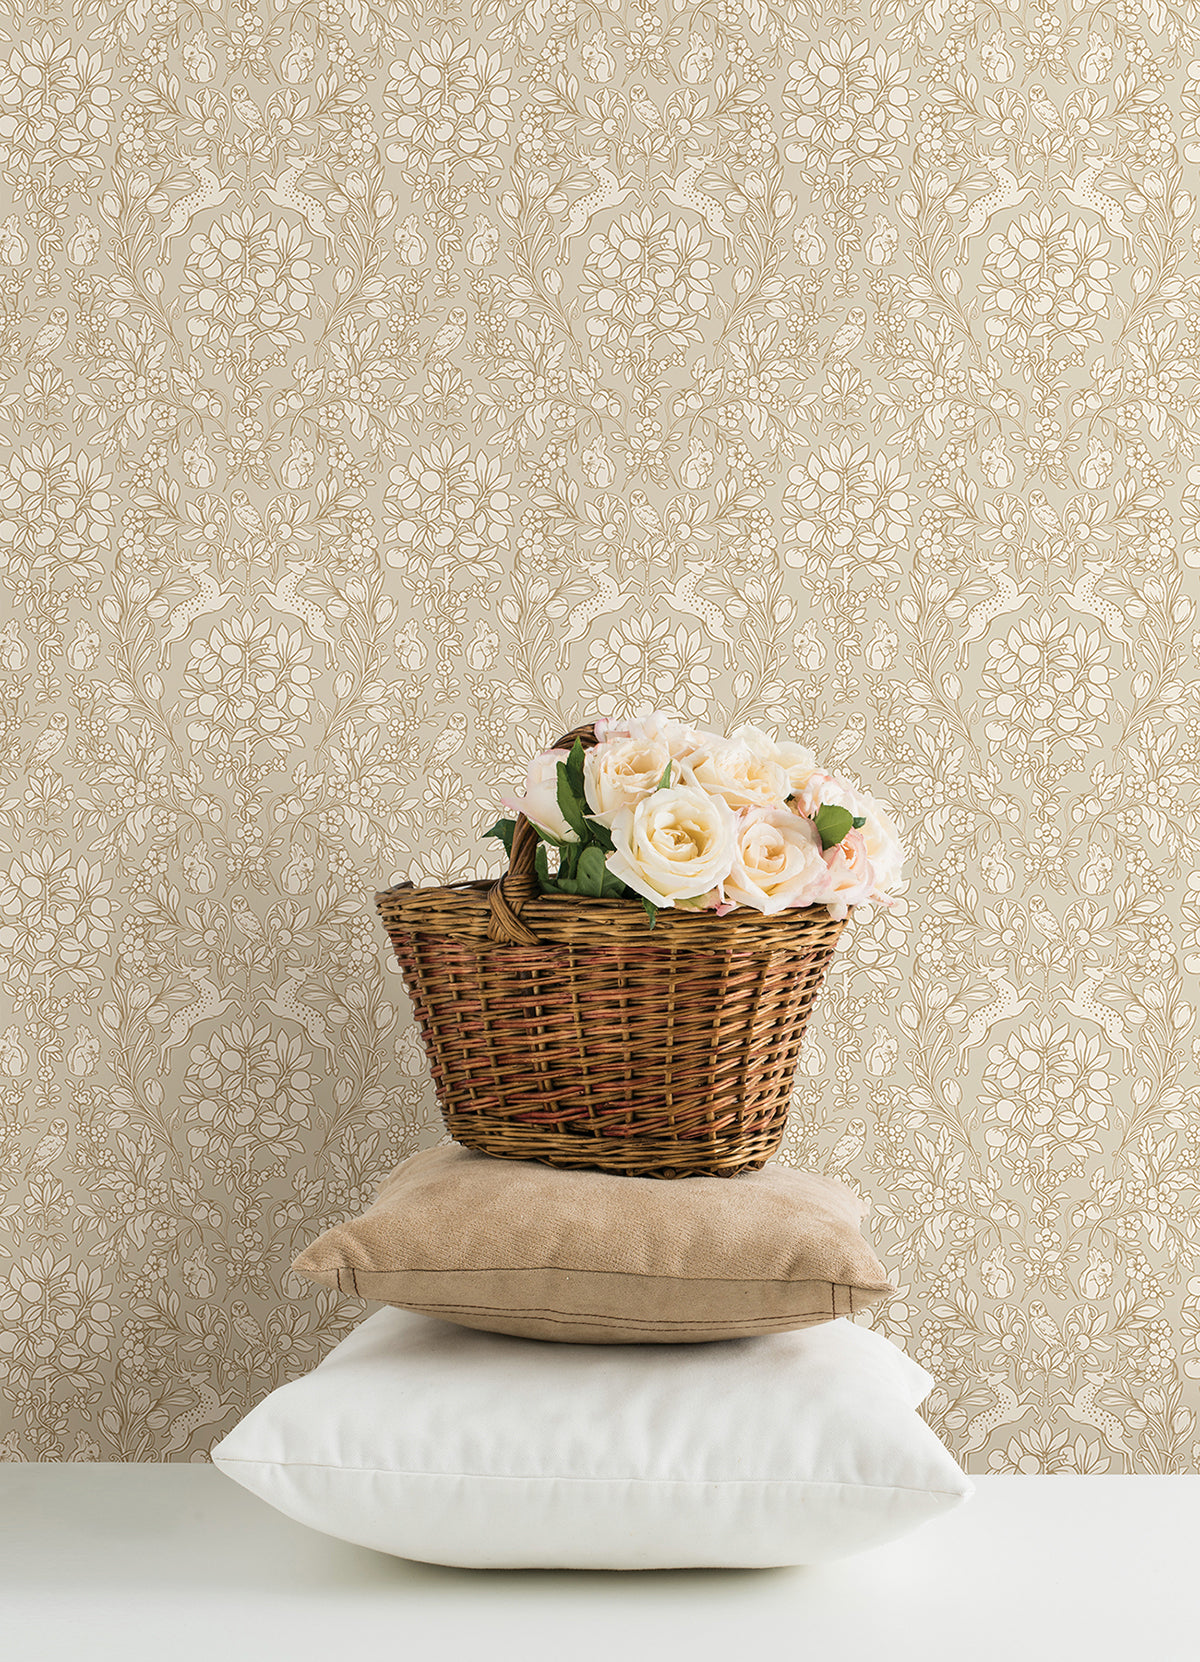 Taupe Enchanted Peel and Stick Wallpaper  | Brewster Wallcovering